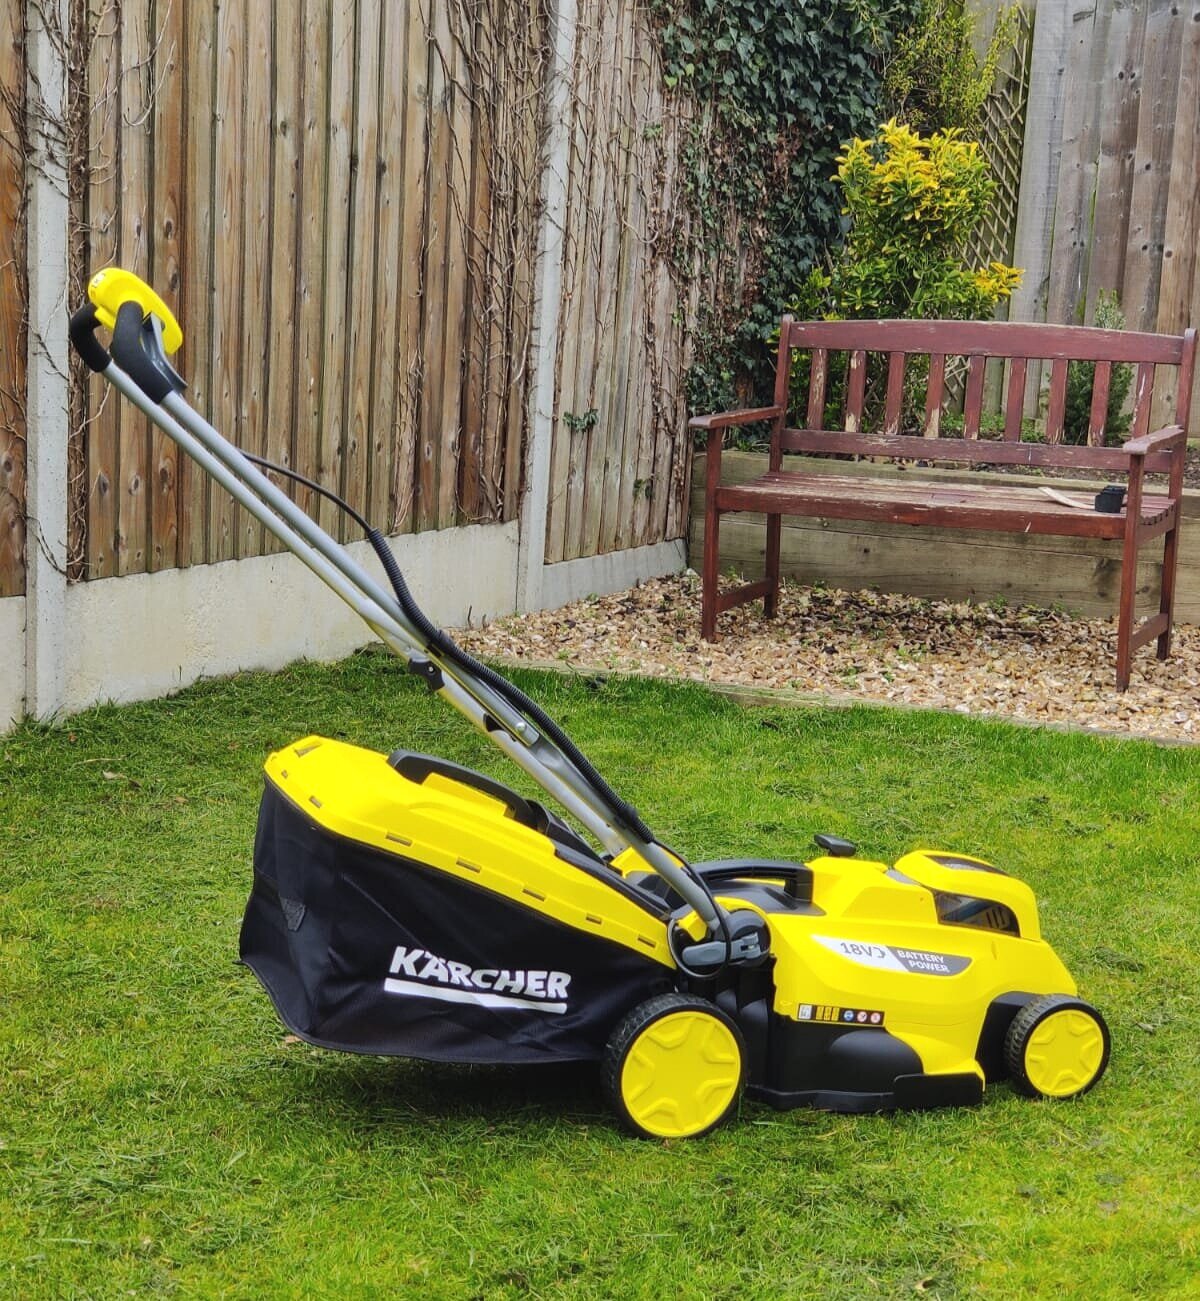 Karcher cordless lawn mover review